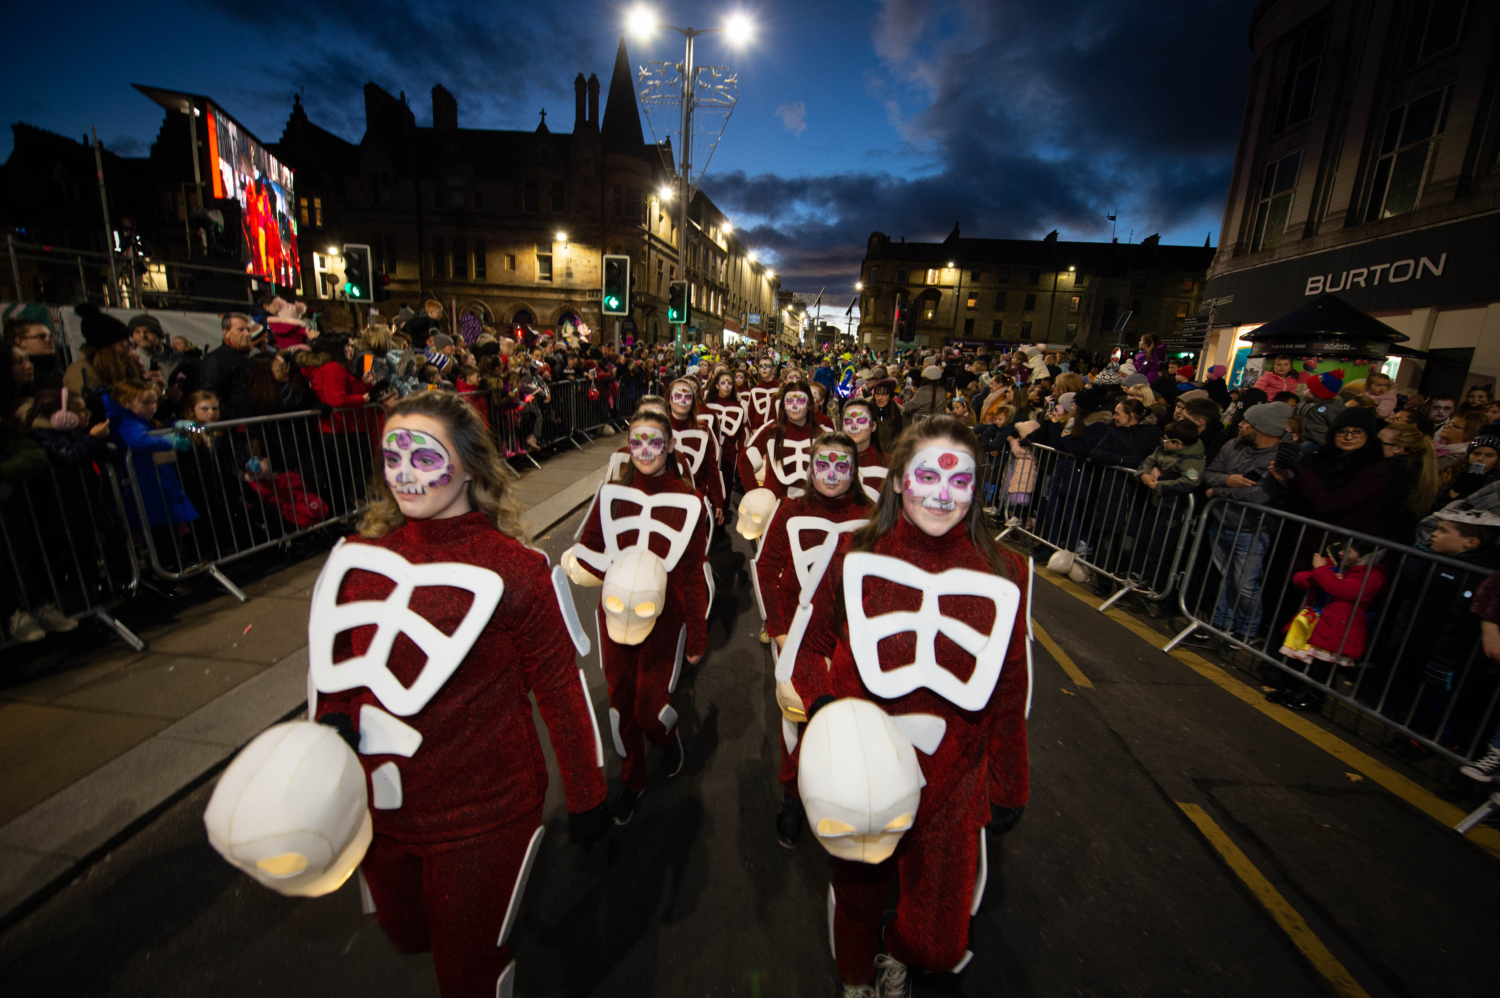 Groups invited to join Spooktacular parade for Paisley Halloween